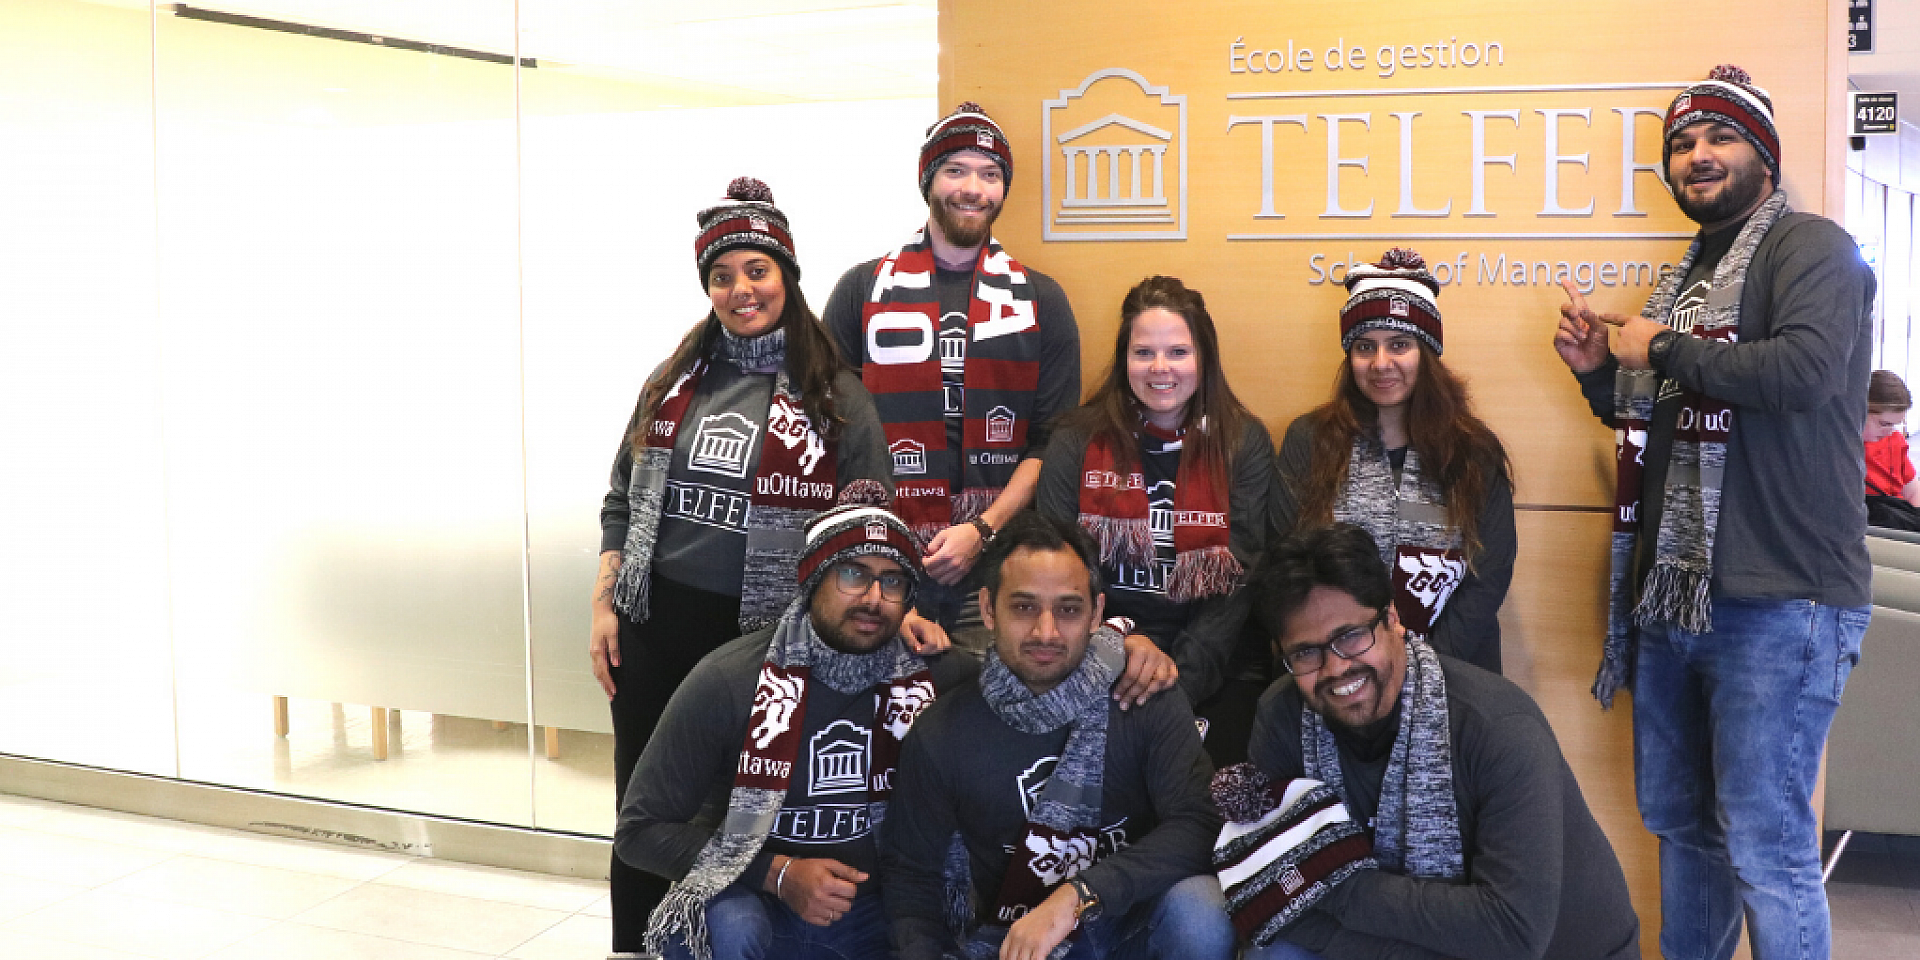 mba games team in front of telfer school of management sign in desmarais building